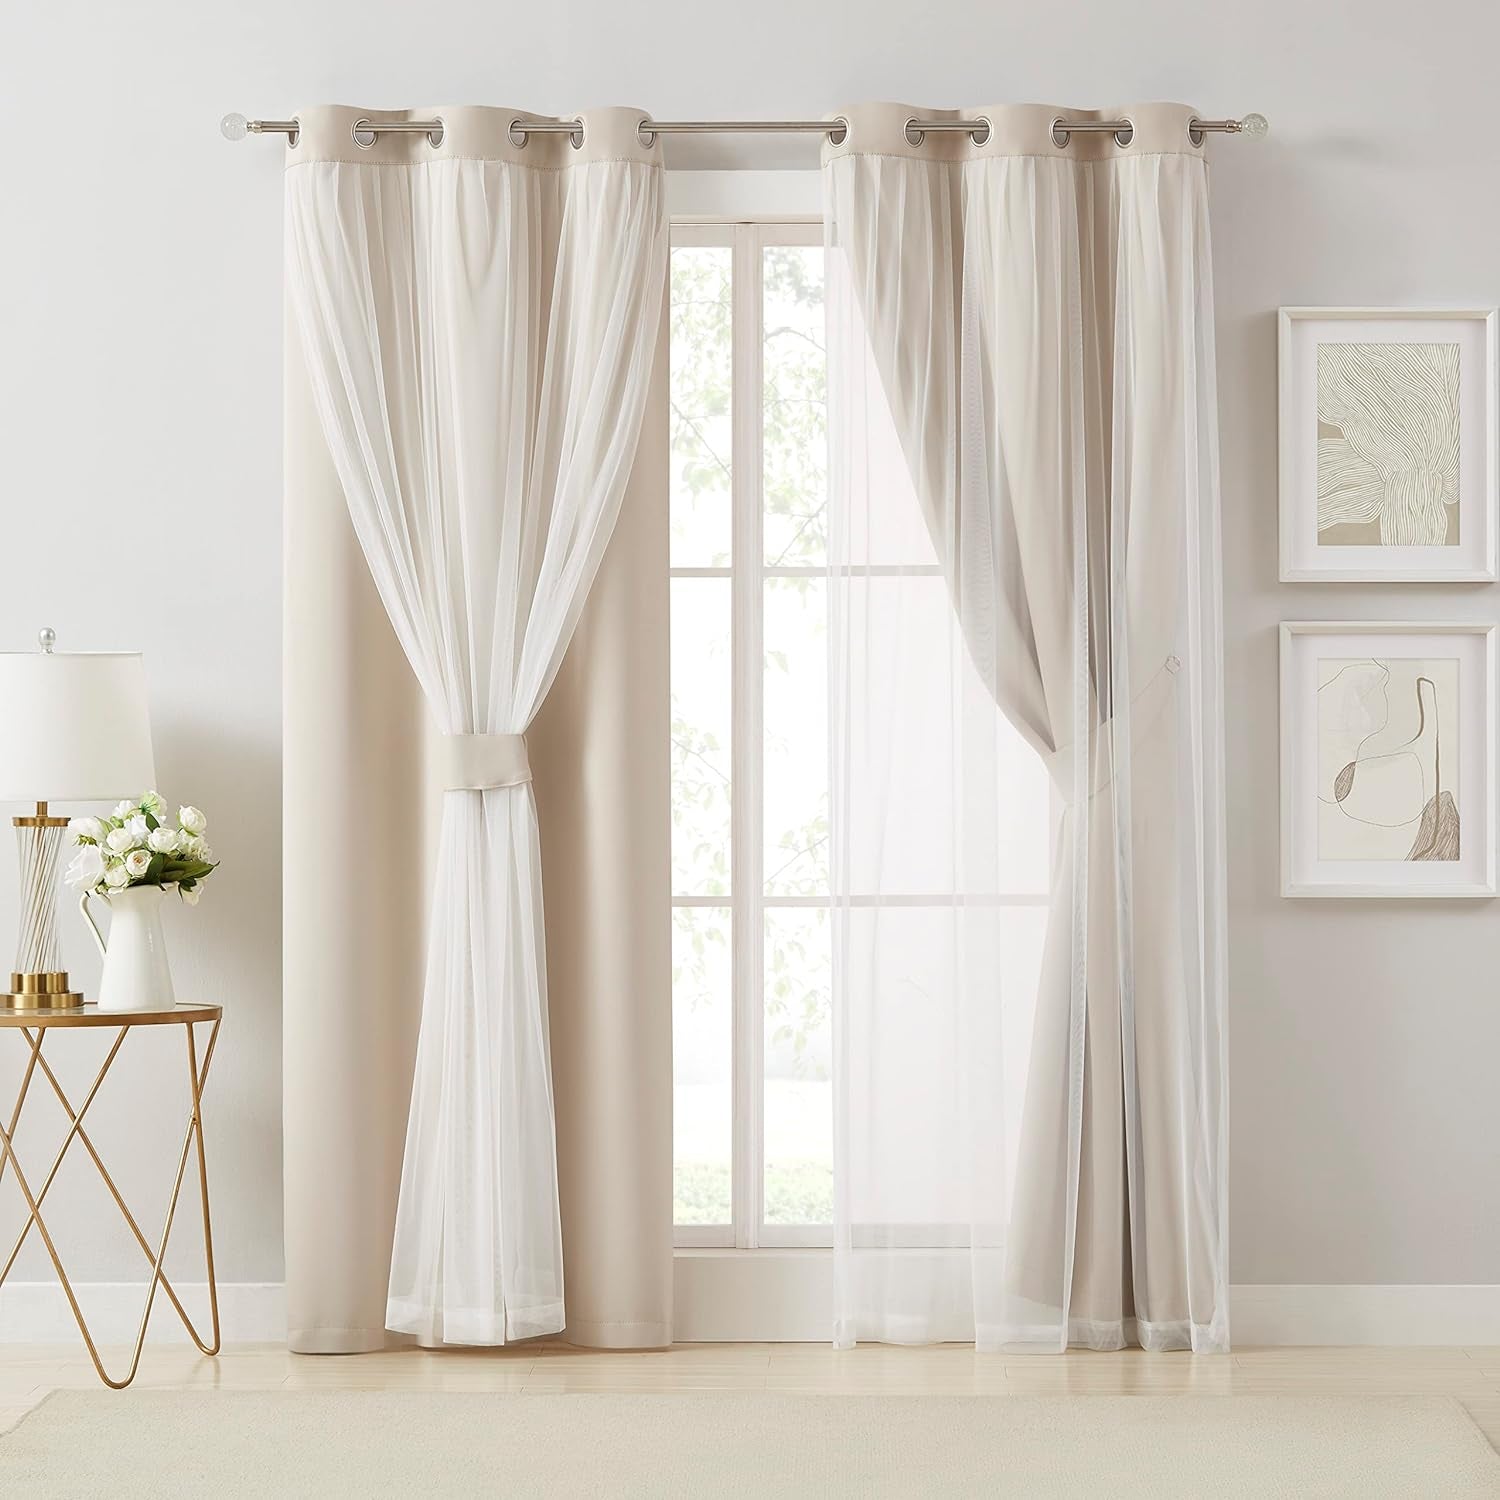 Bujasso Beige 90% Blackout Curtains with Sheer Overlay Mix and Match Double Layer Thermal Insulated Window Panels 84 Inch for Living Room Bedroom Beige Drapes with Tiebacks Grommet Top 37" Wx84 Lx2  Bujasso   